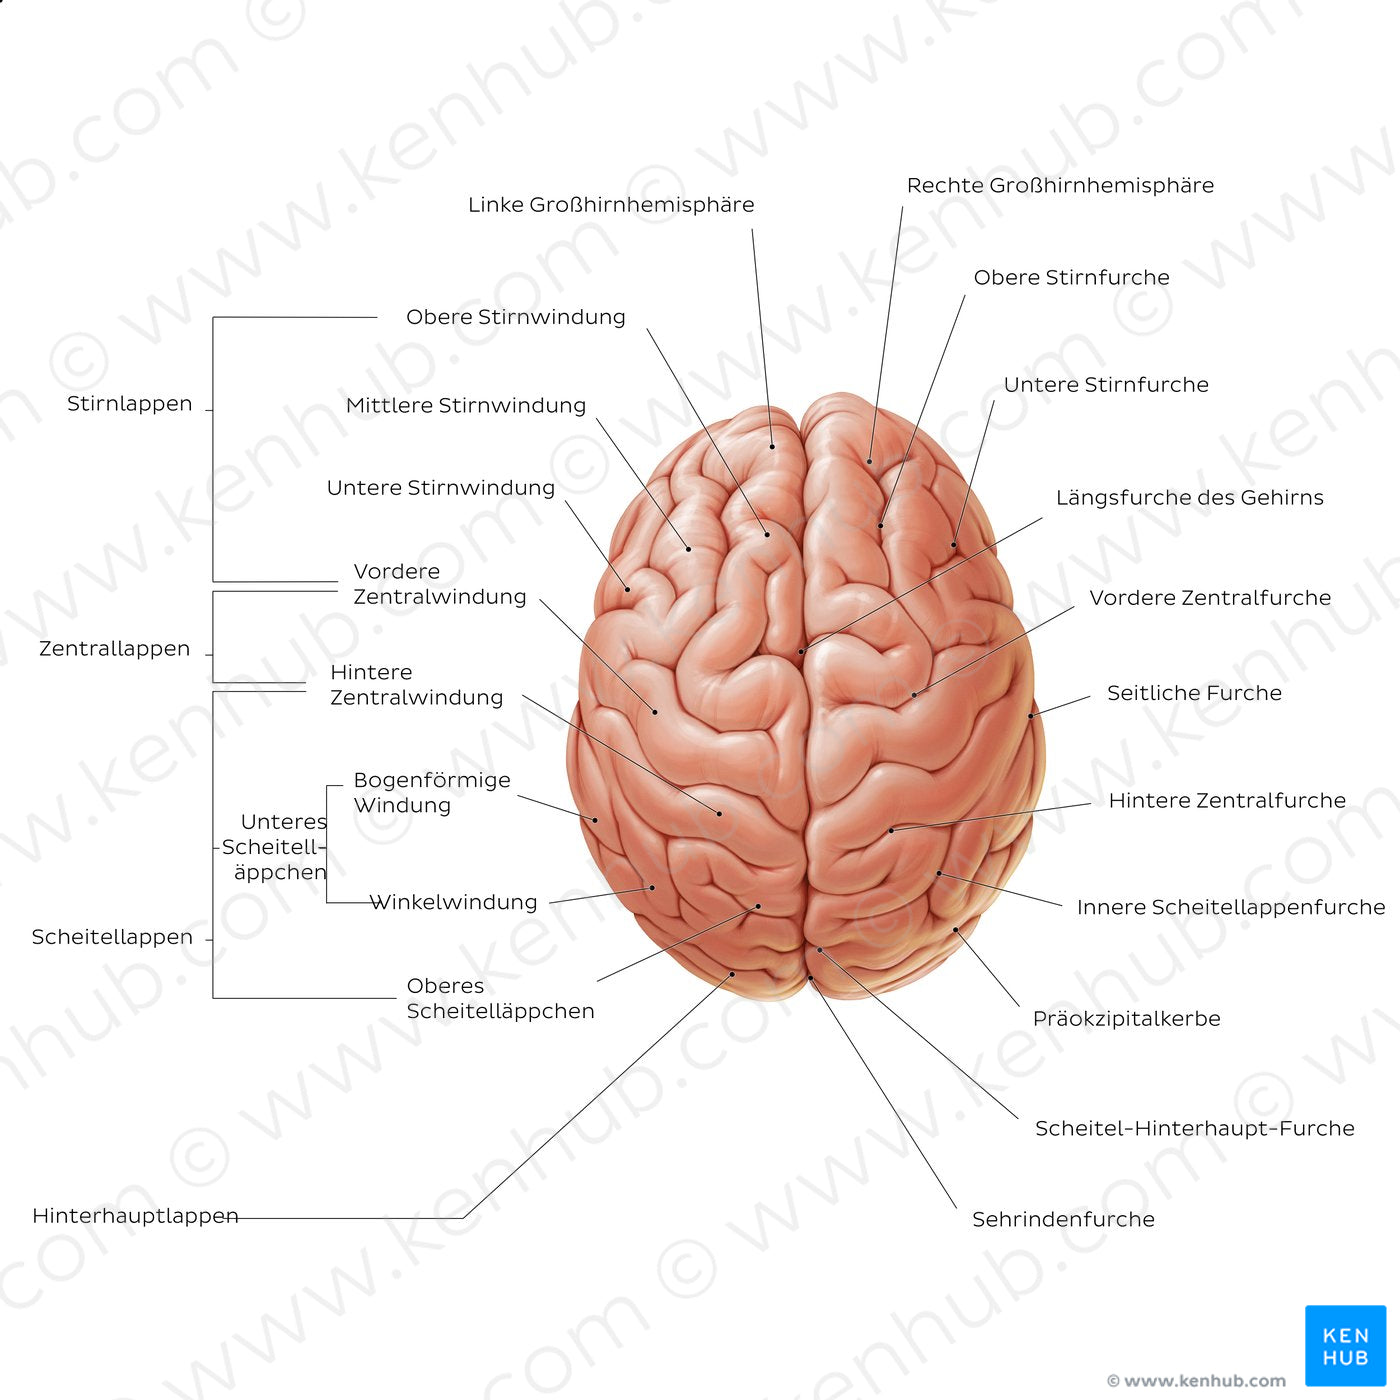 Superior view of the brain (German)